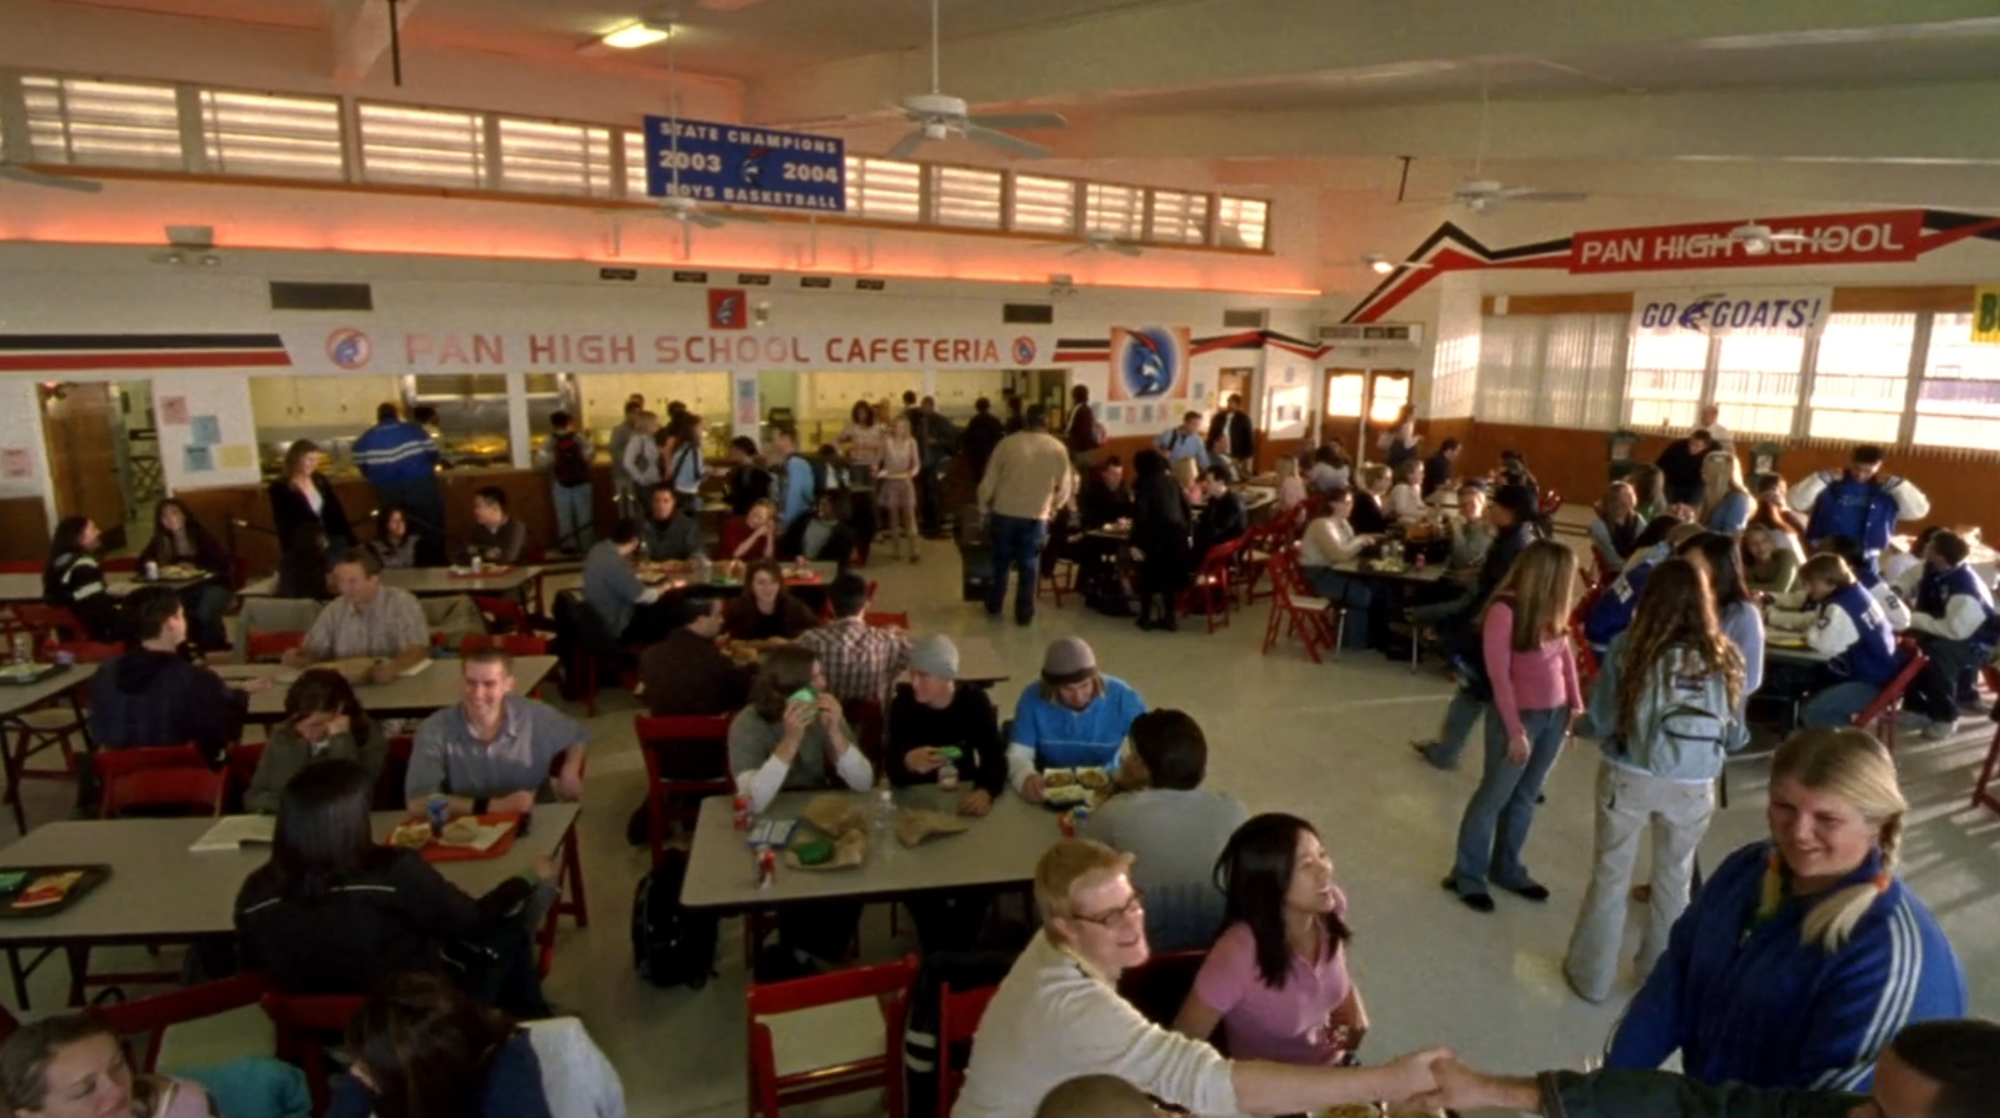 Screenshot from S1E16 of Veronica Mars. A wide shot of Pan High cafeteria filled with students